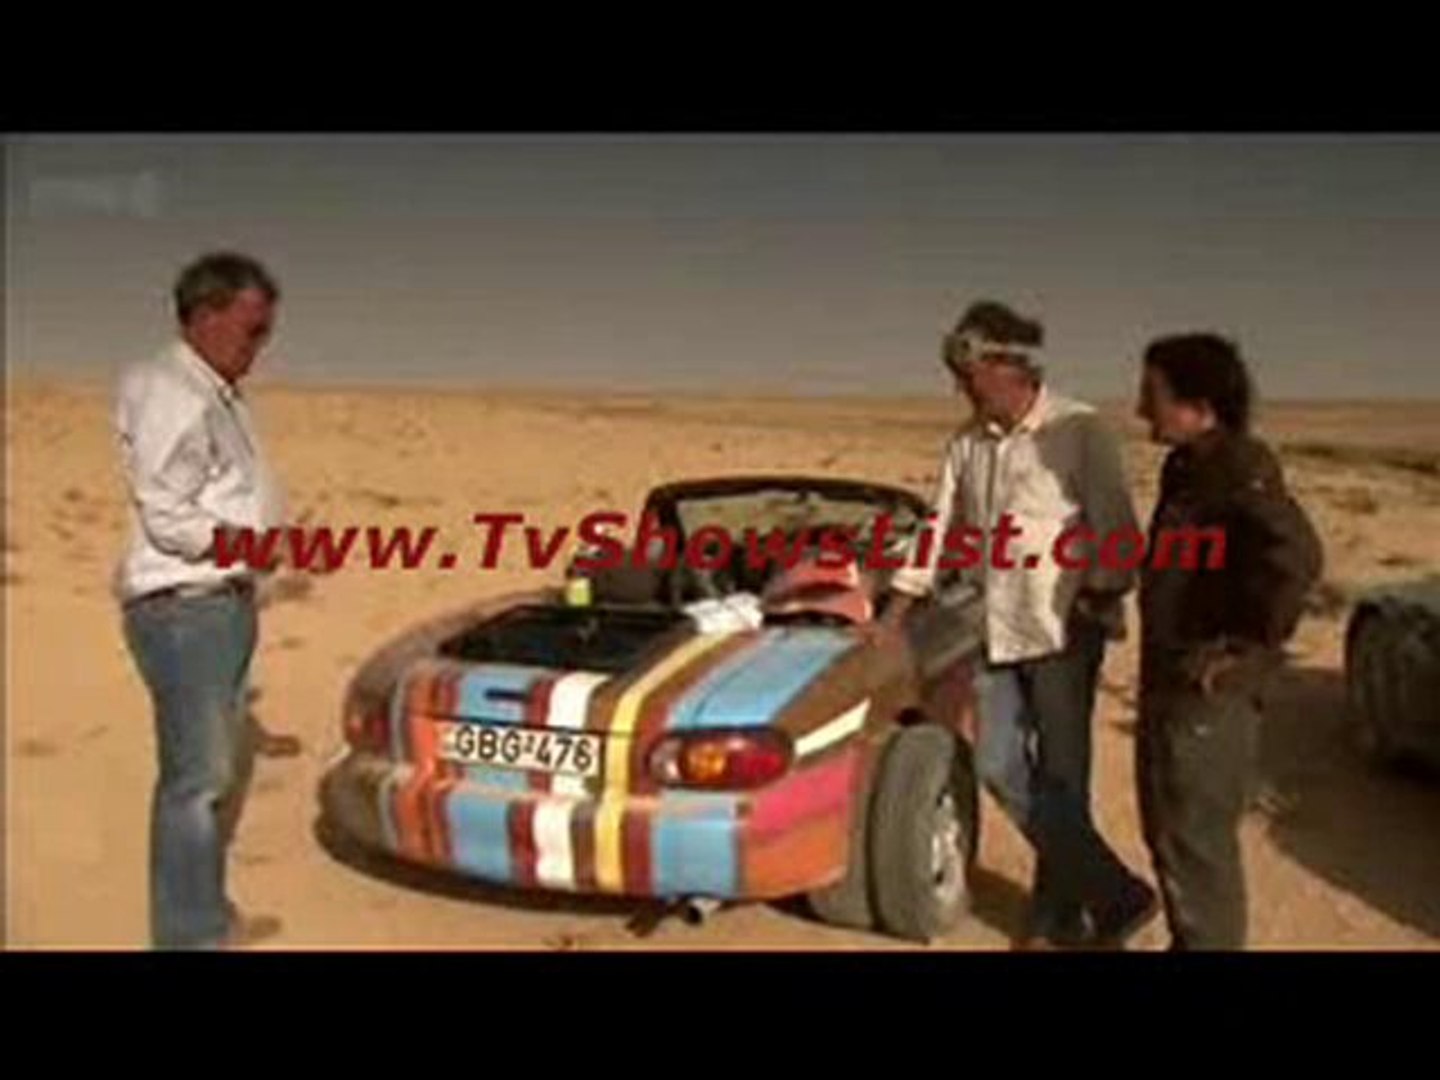 Top Gear East Special Dailymotion U.K., SAVE 42% aveclumiere.com